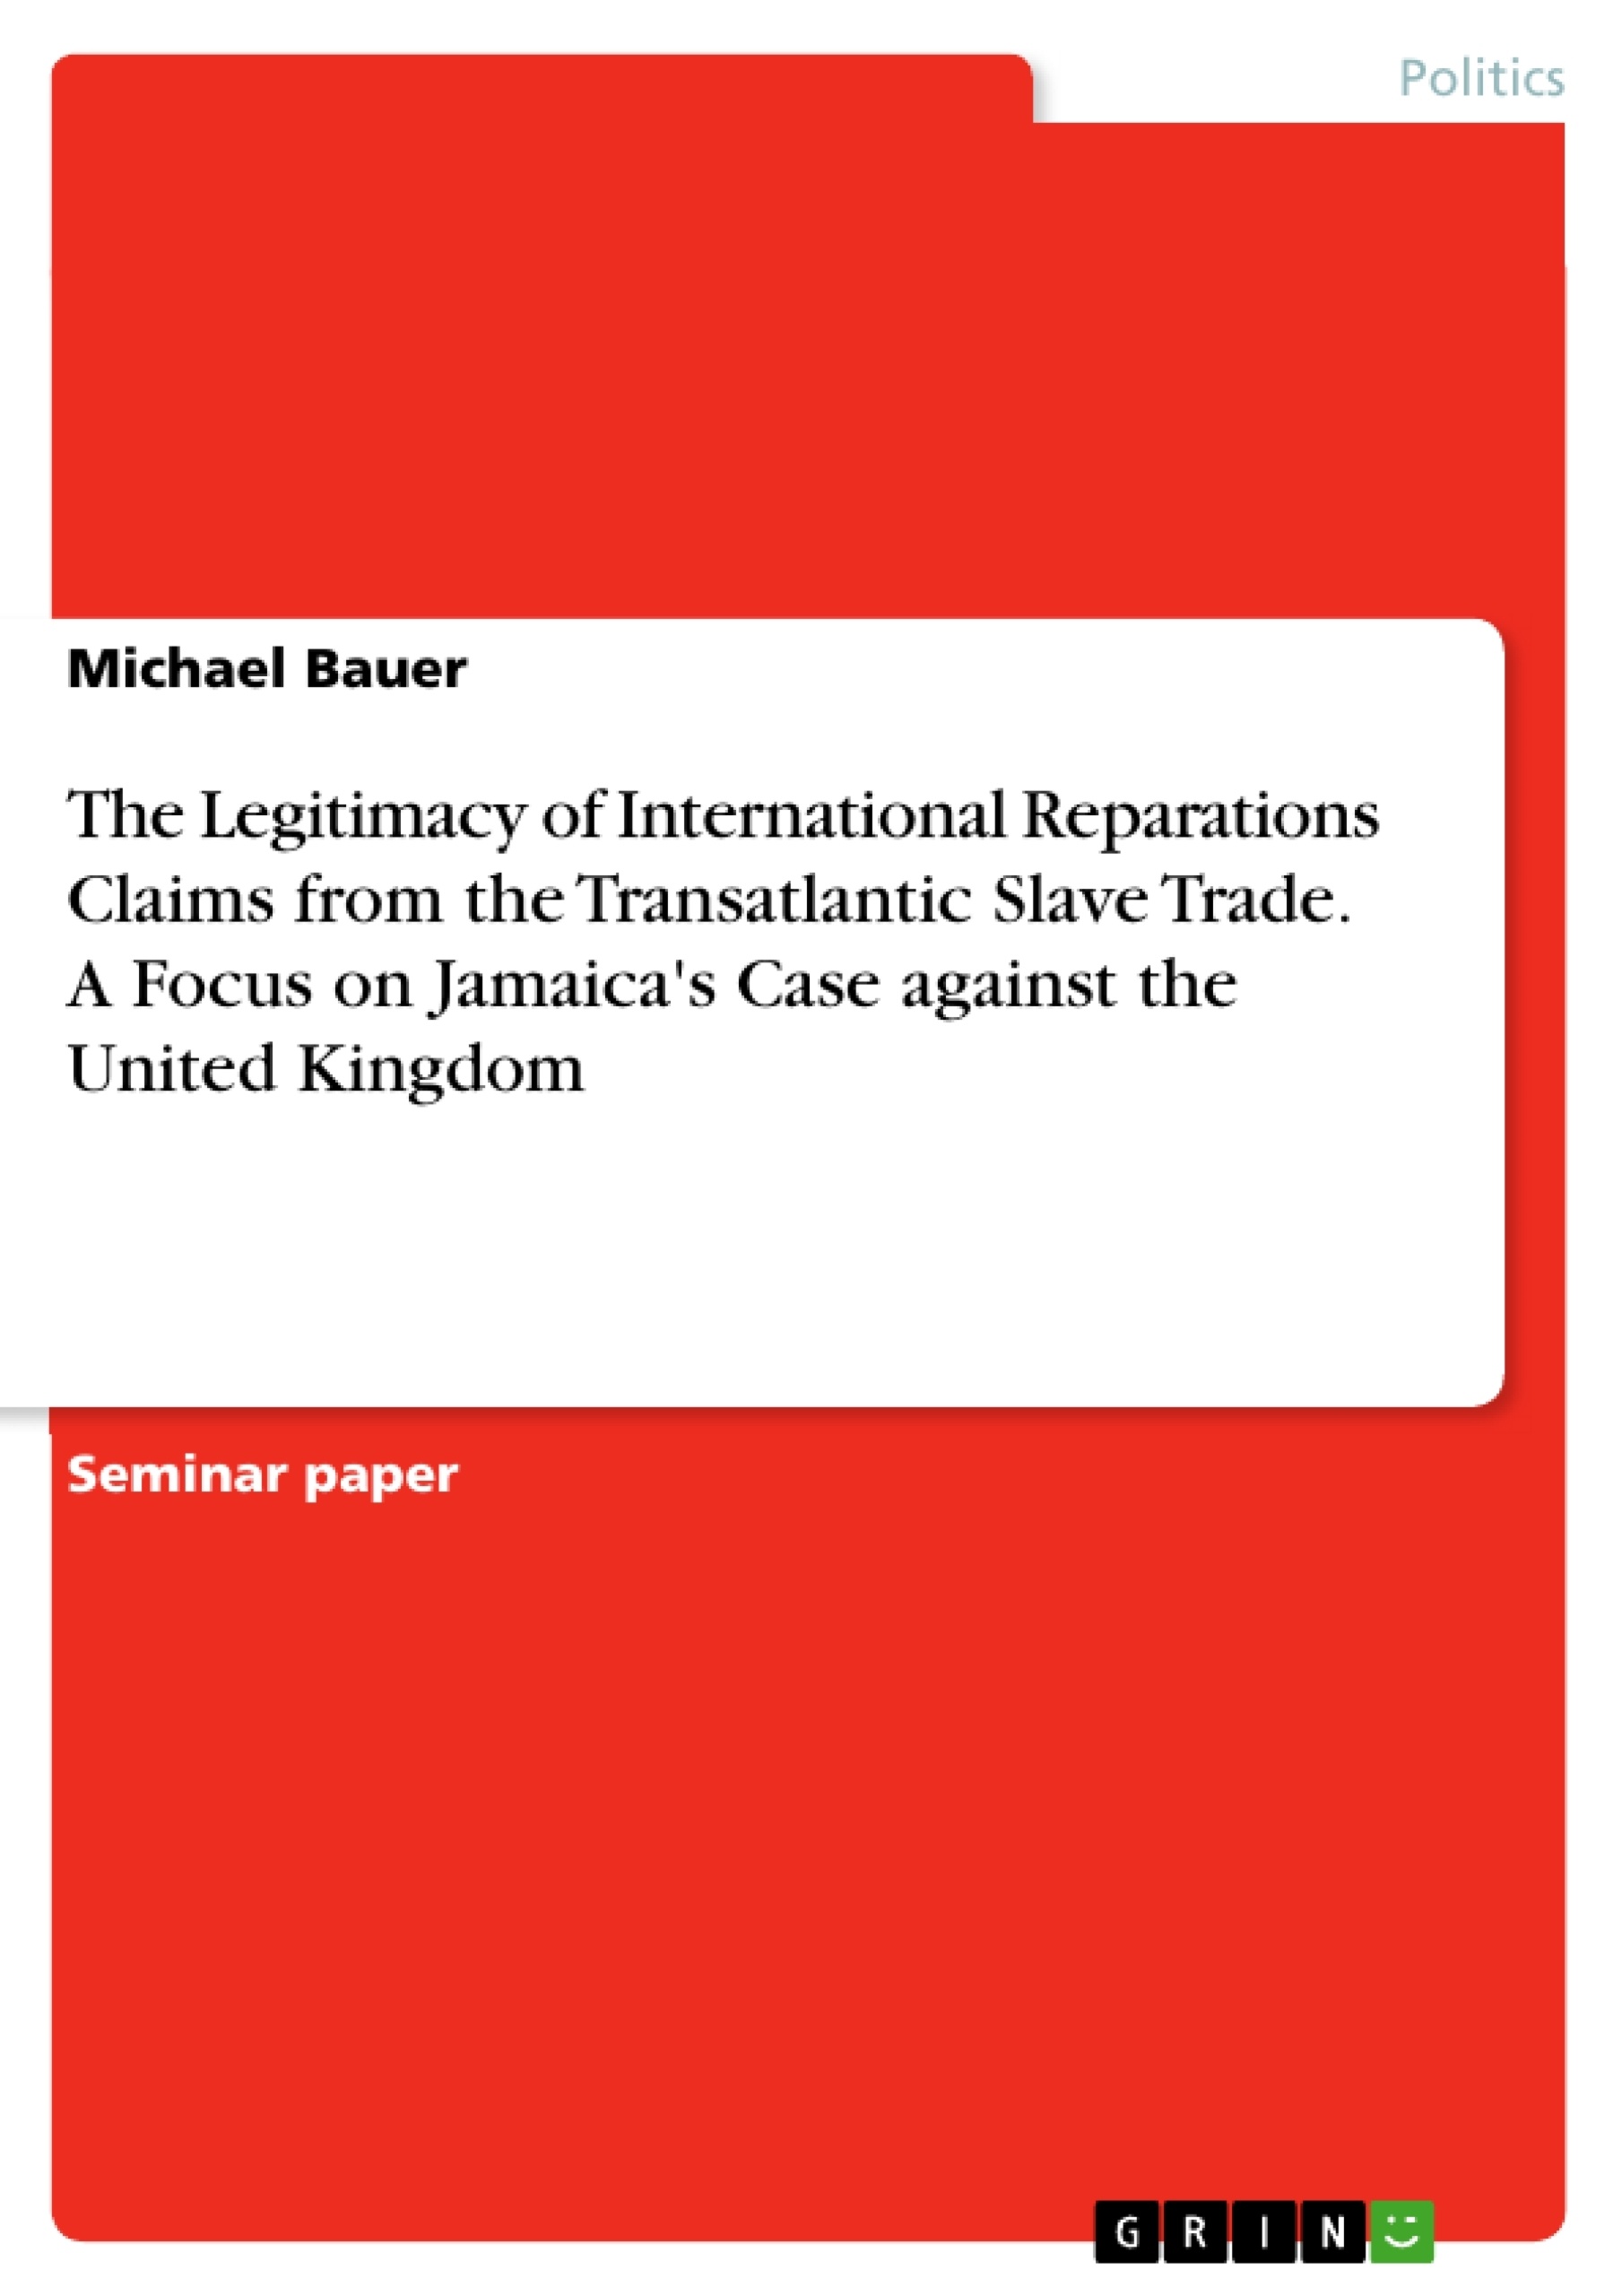 Título: The Legitimacy of International Reparations Claims from the Transatlantic Slave Trade. A Focus on Jamaica's Case against the United Kingdom